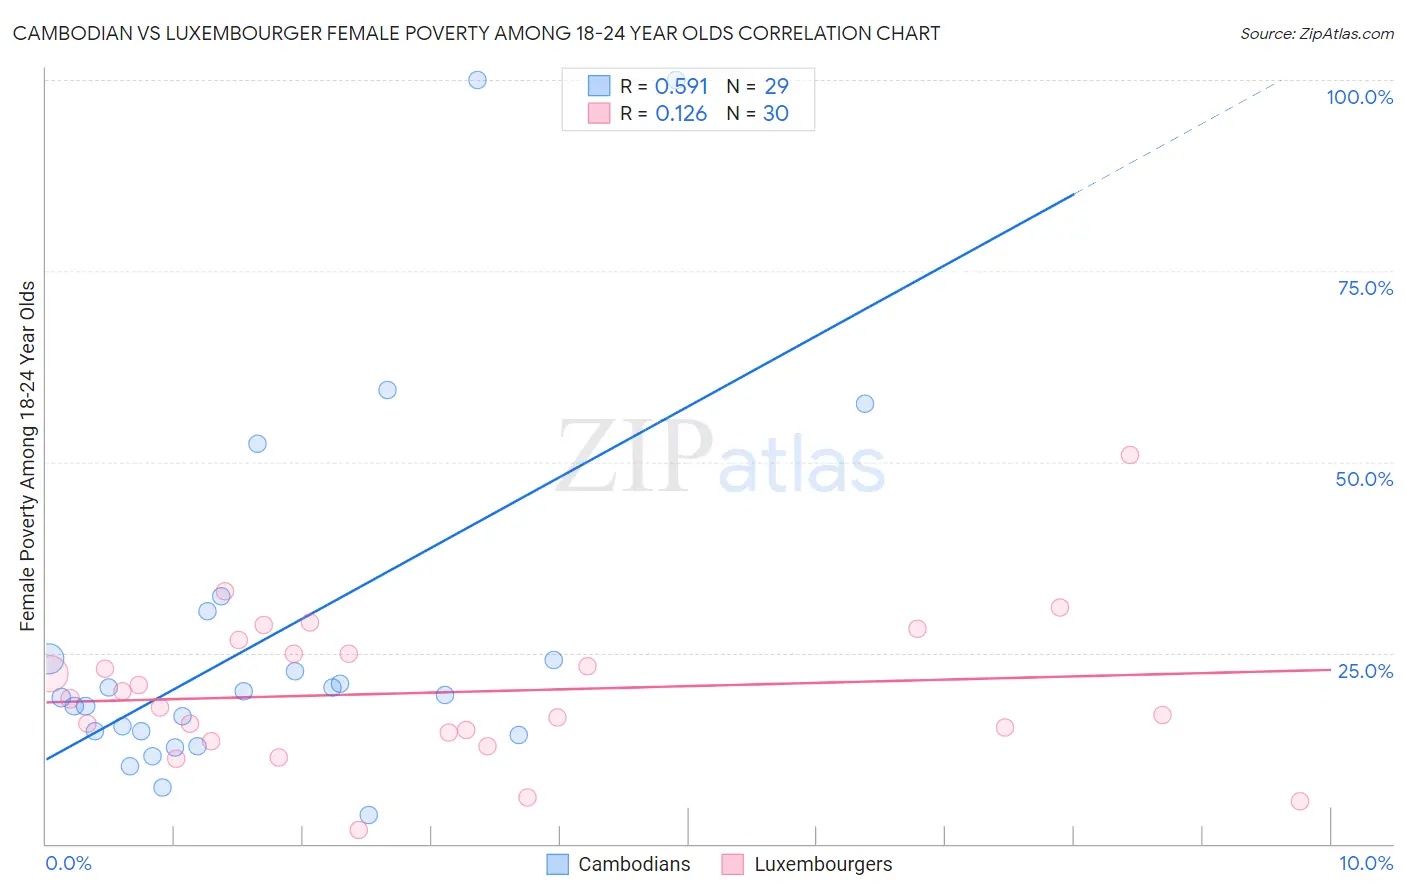 Cambodian vs Luxembourger Female Poverty Among 18-24 Year Olds